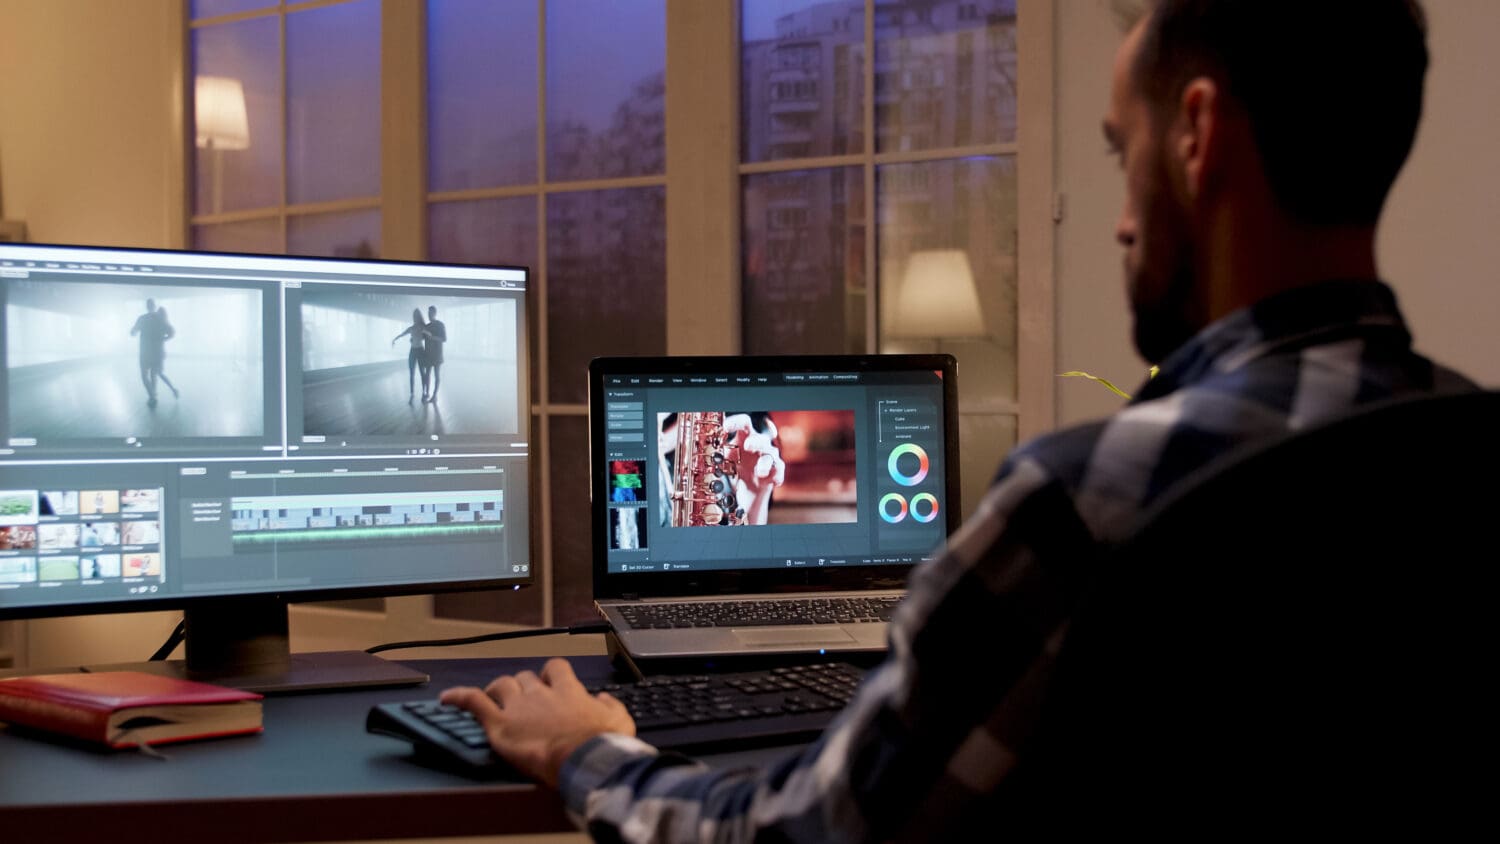 A man uses two computer screens to create an eCommerce video marketing campaign with graphs and video production software.